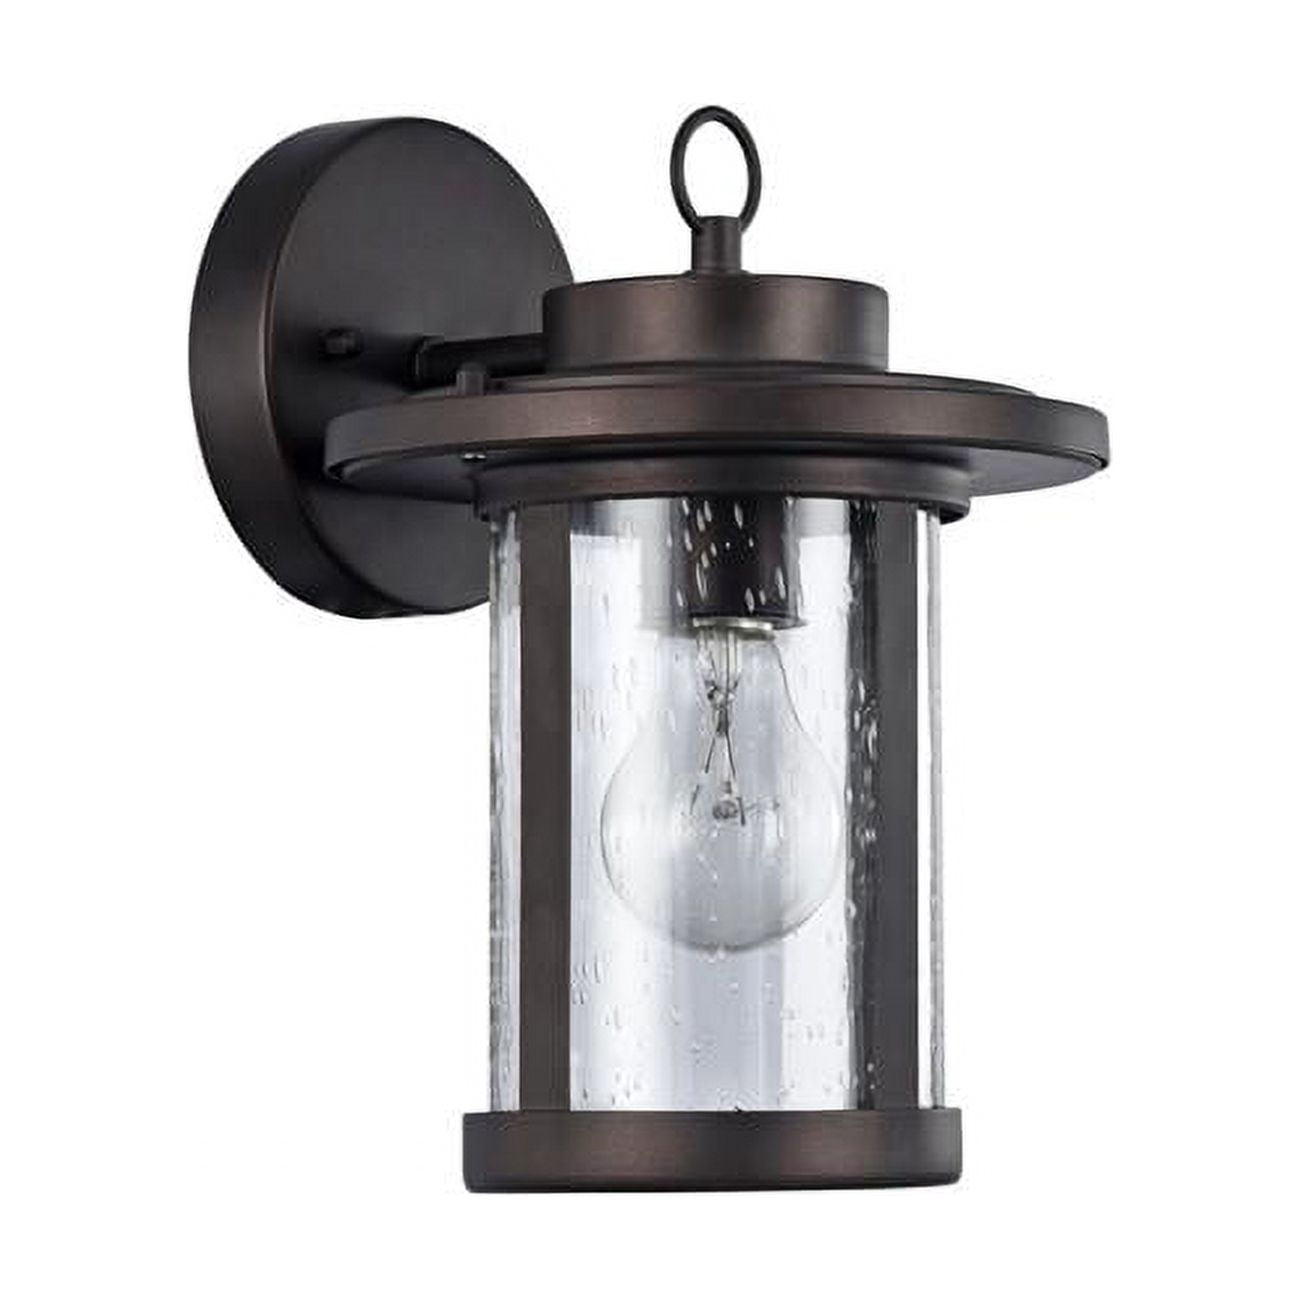 Ch22060rb10-od1 10 In. Lighting Vaxcel Transitional 1 Light Rubbed Bronze Outdoor Wall Sconce - Oil Rubbed Bronze